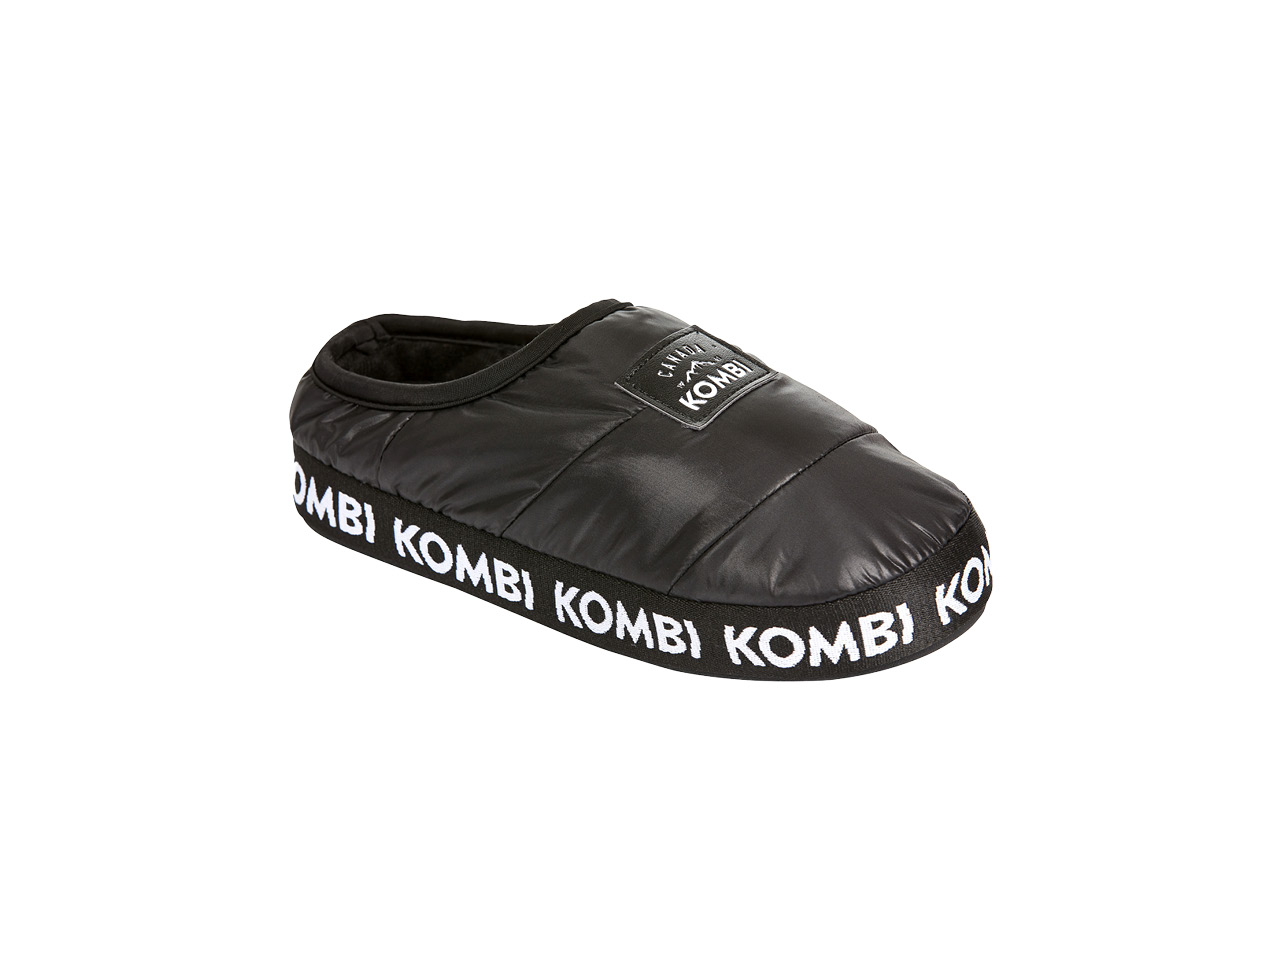 Black puff slippers with "Kombi" logo printed at the bottom.